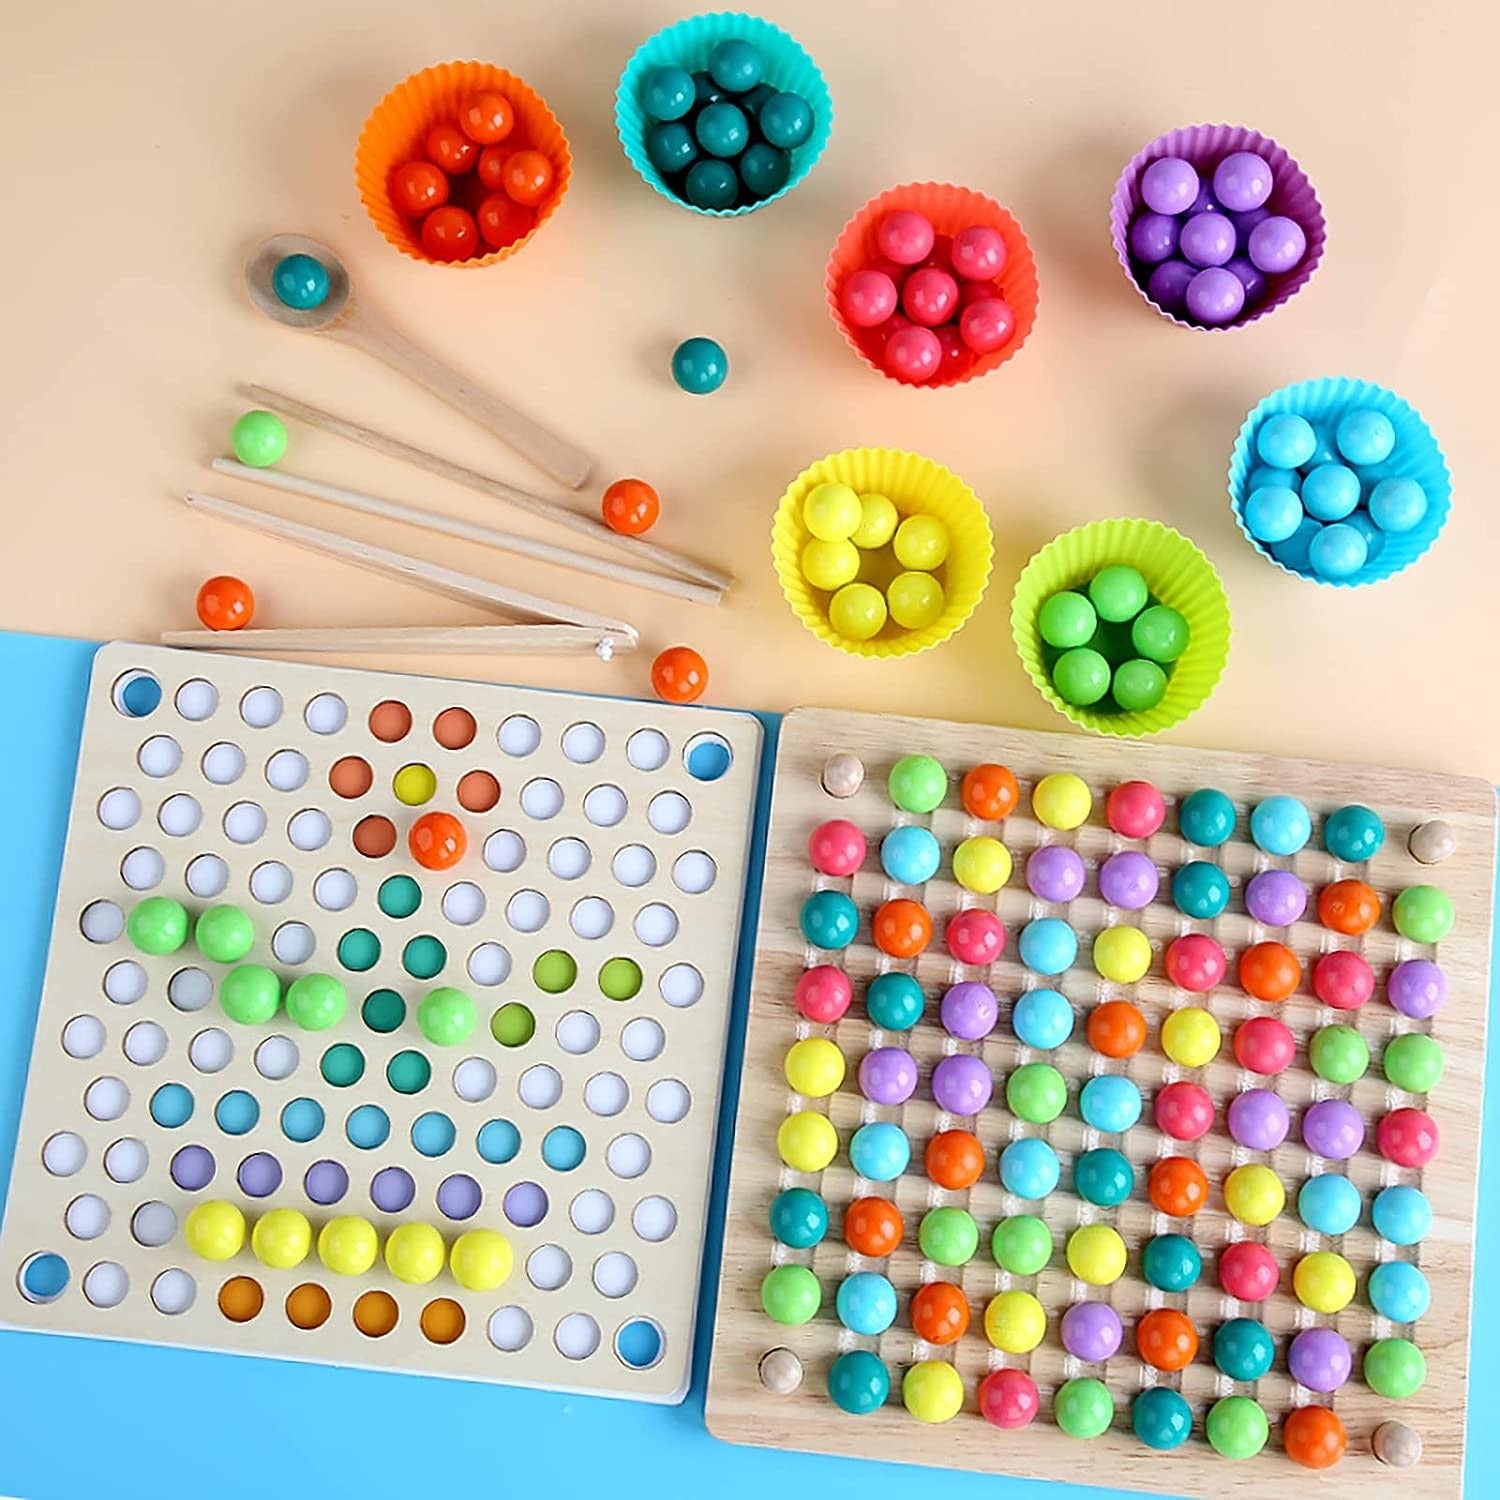 A colorful board game with colorful balls and sticks.